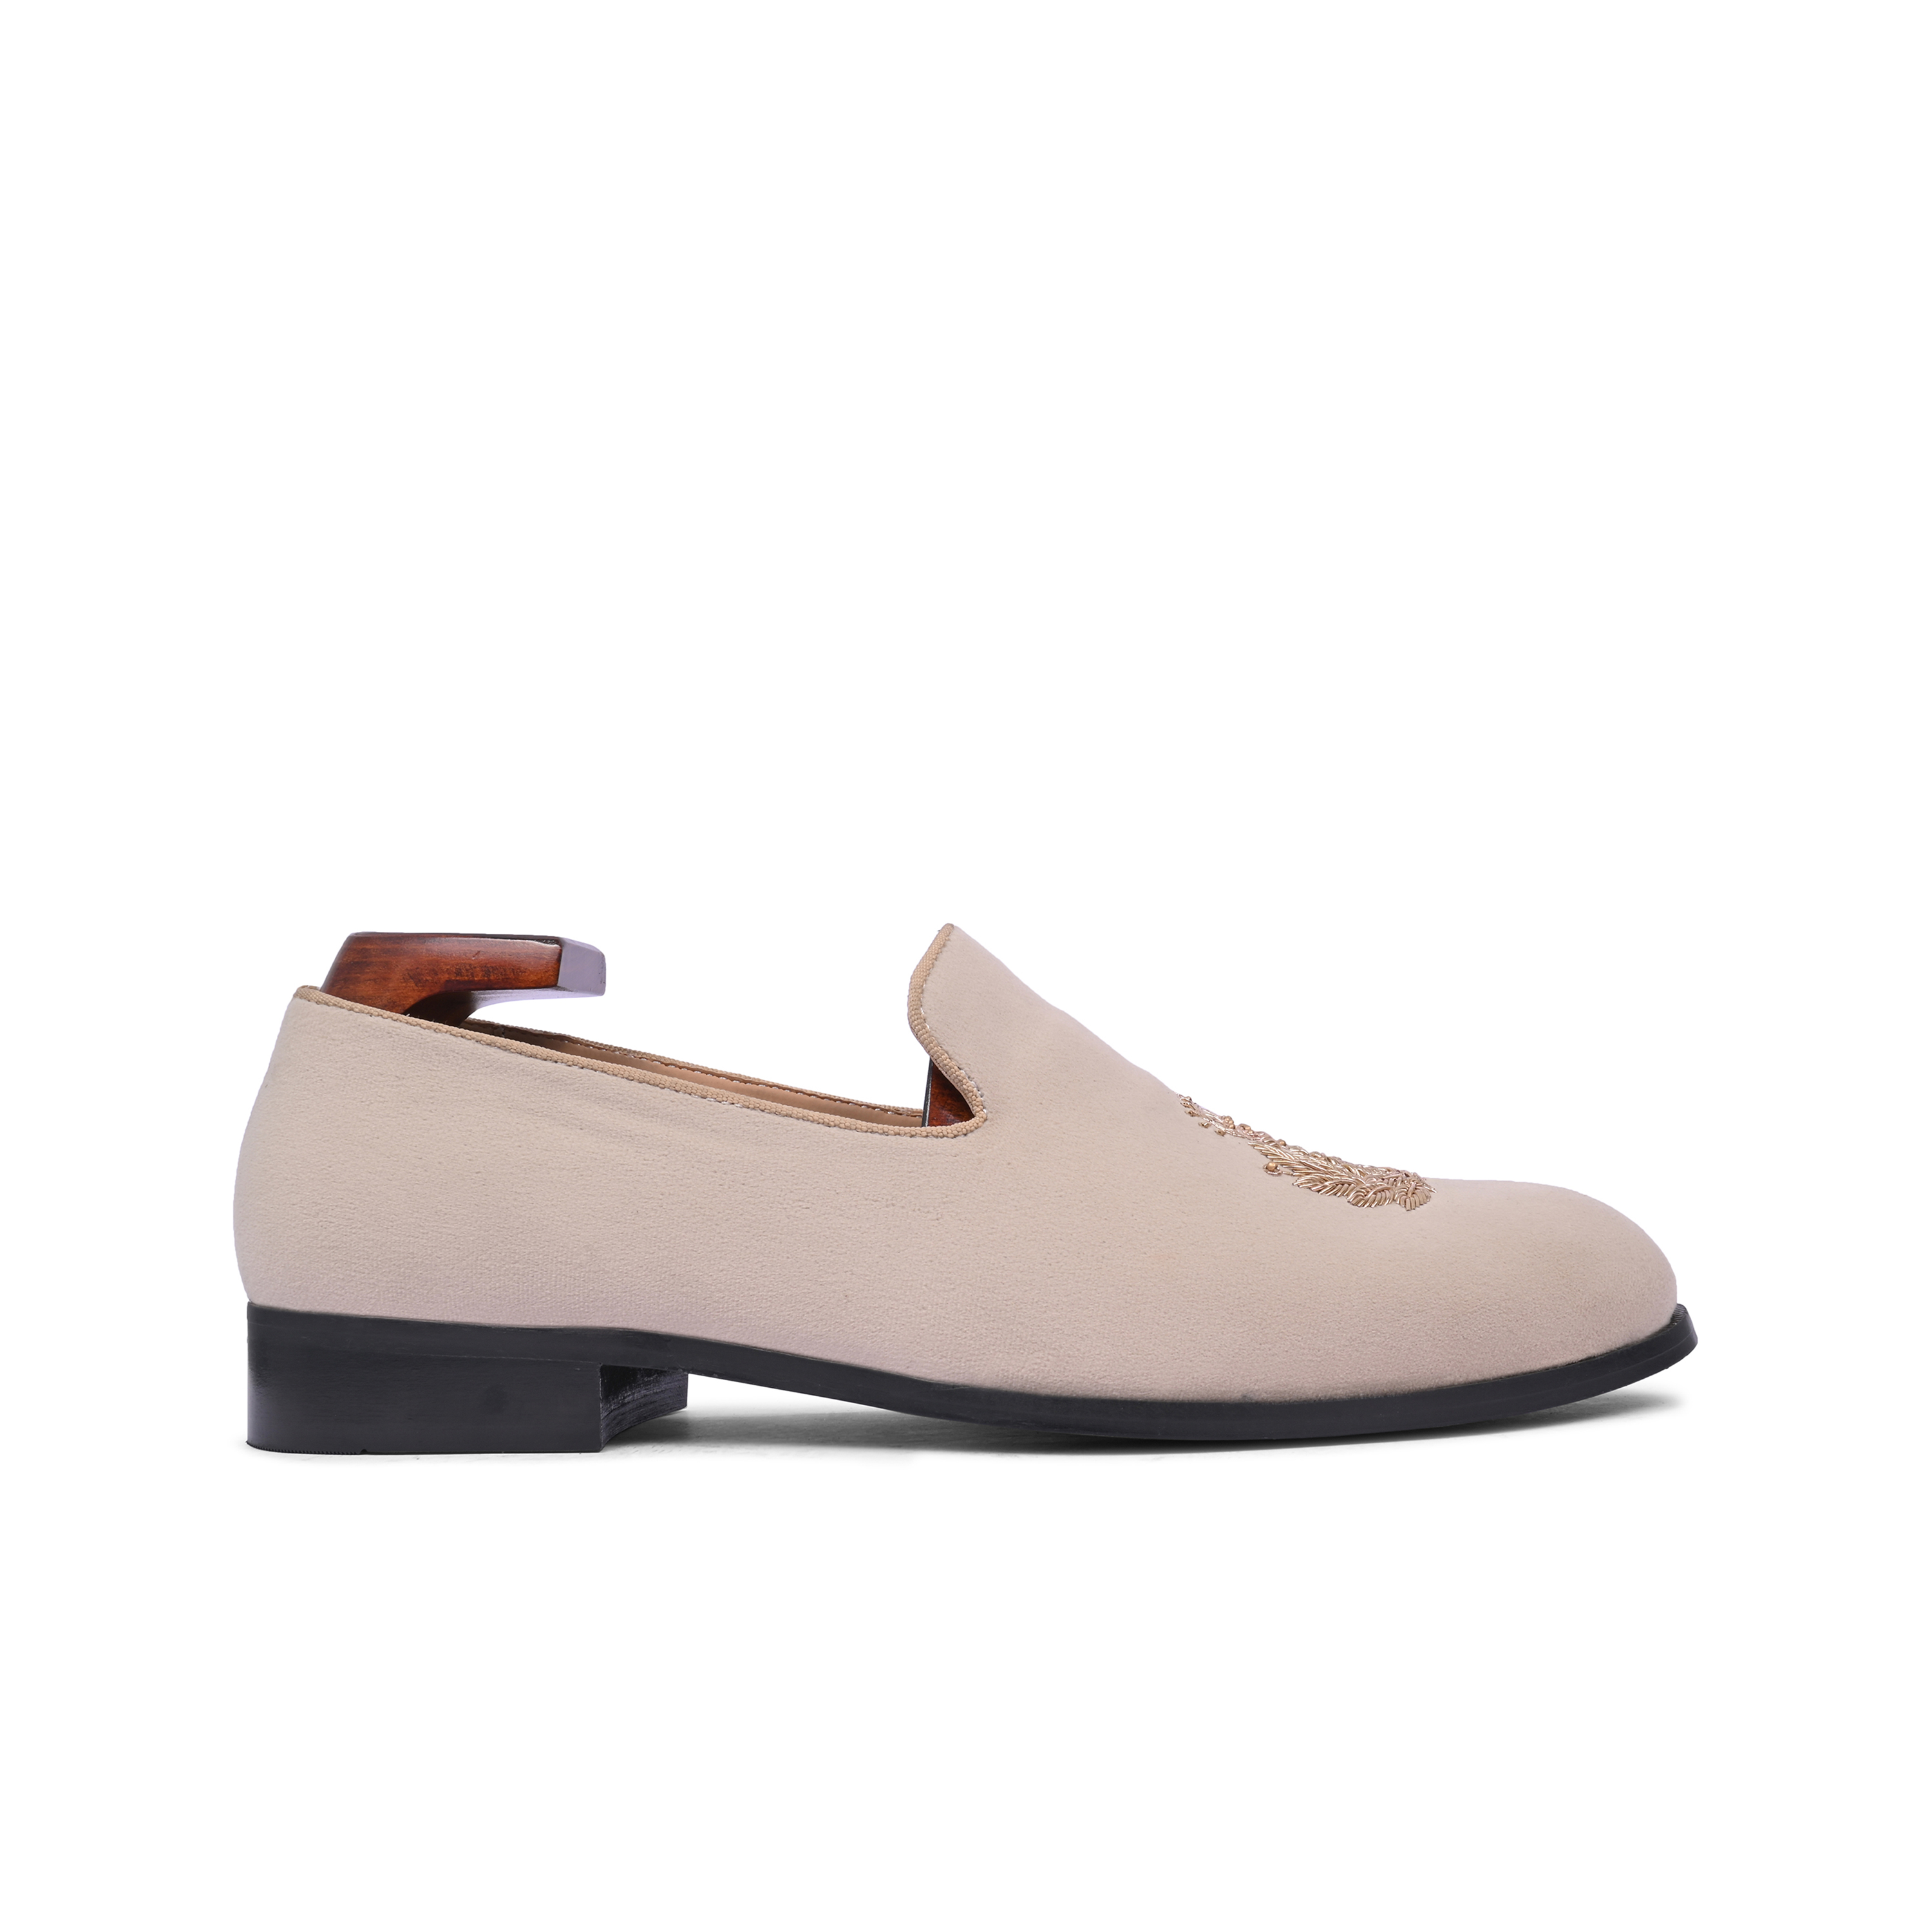 SoleCraft Loafers Shoes